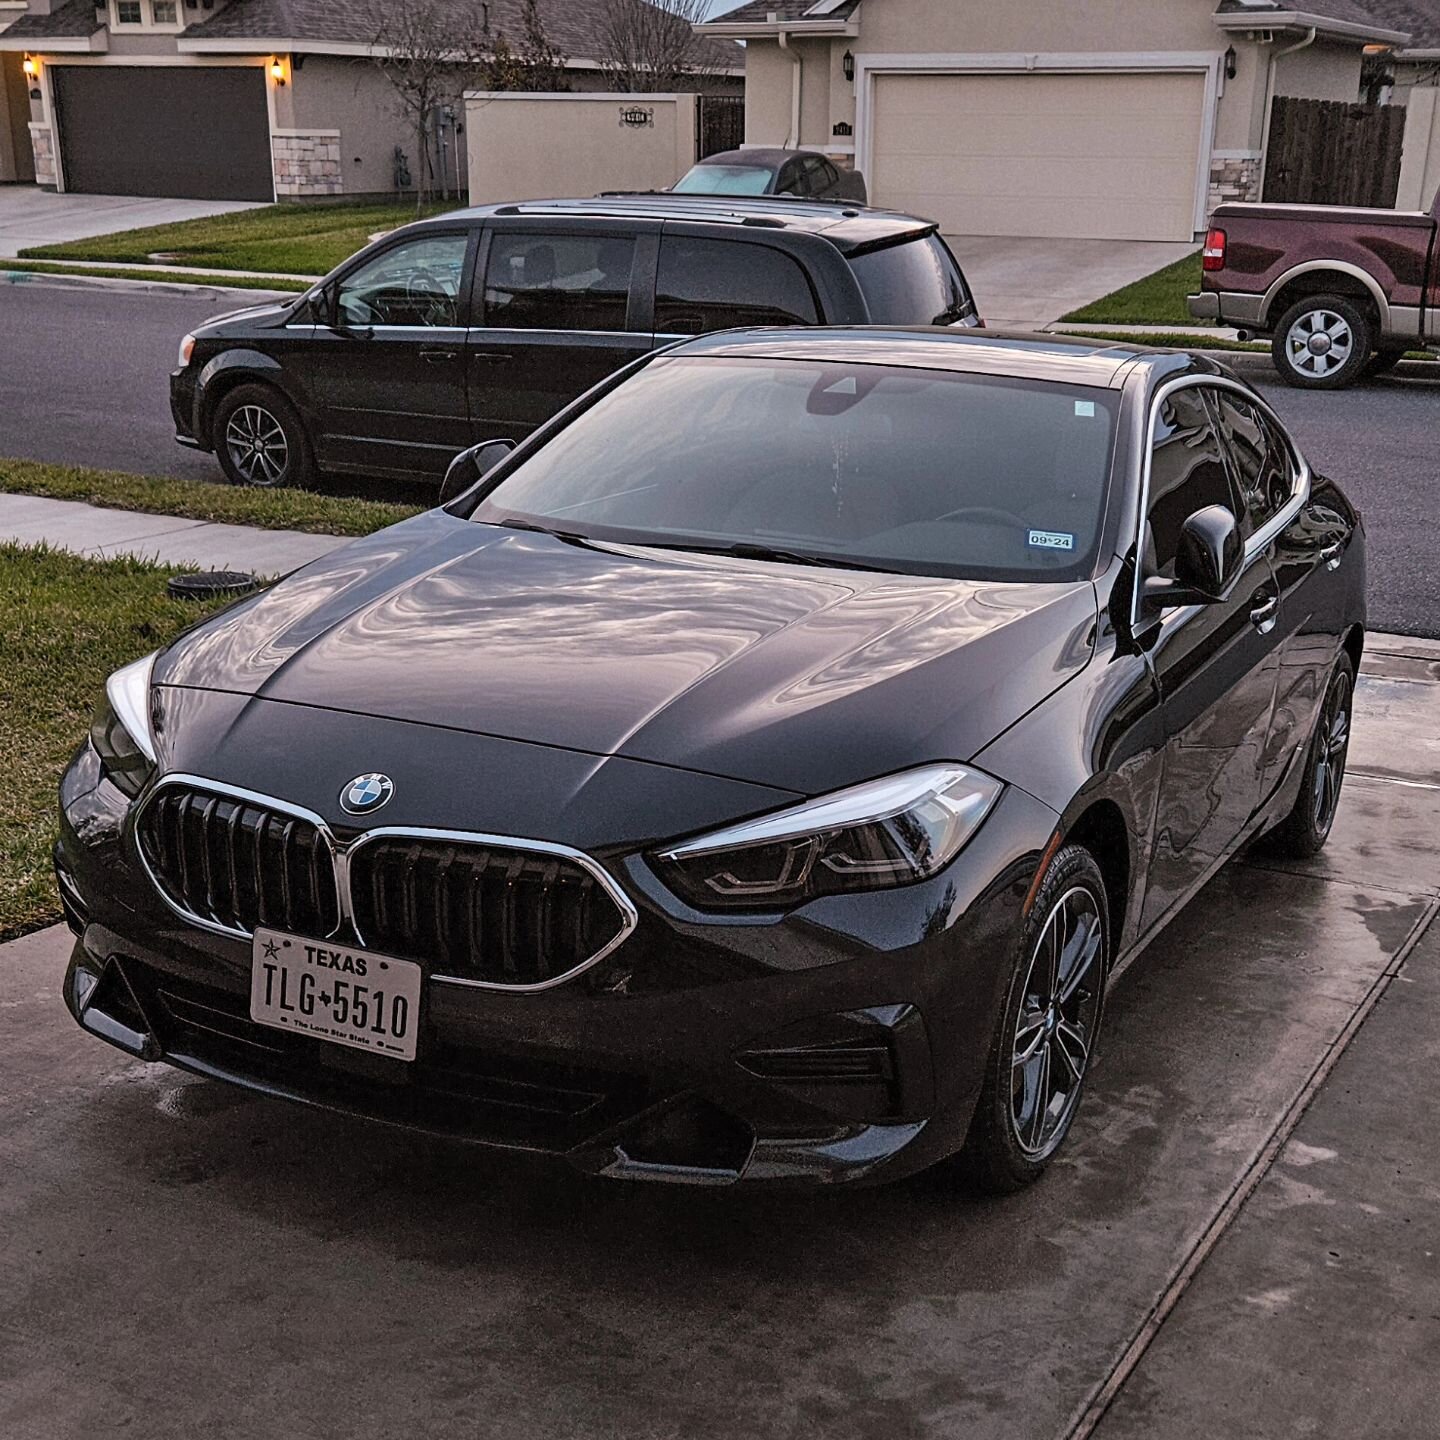 Express Maintenance Detail on display with a stunning #bmw #sedan 

Our clients take our maintenance services as a necessary part of there lifestyle!

When you have a vehicle that is dirty, most of the time, it puts your mental state lower than it co